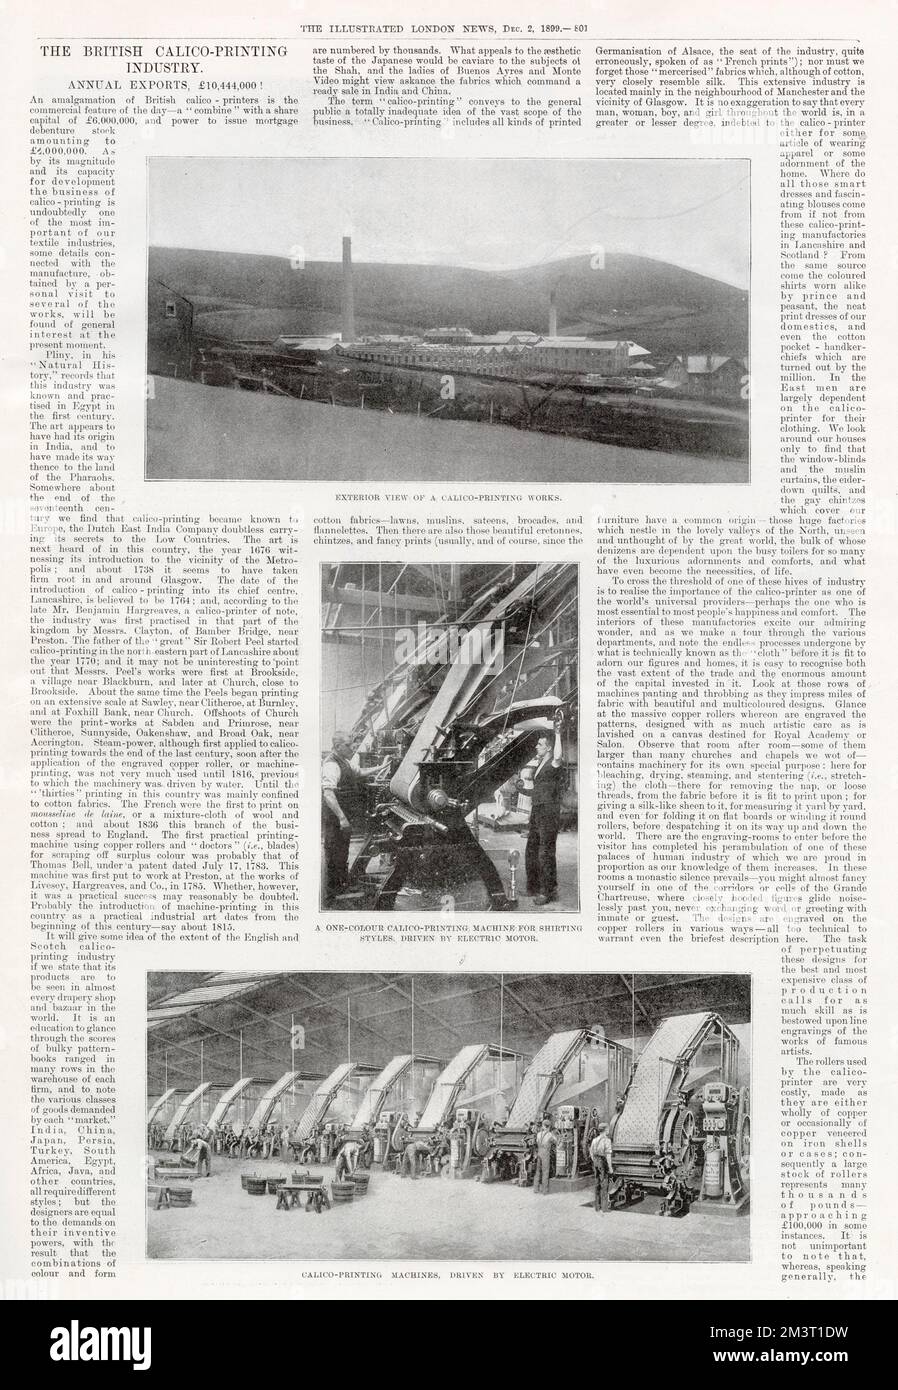 Page (1 of 2 - see picture no. 13140288) from The Illustrated London News reporting on the British calico-printing industry. Stock Photo